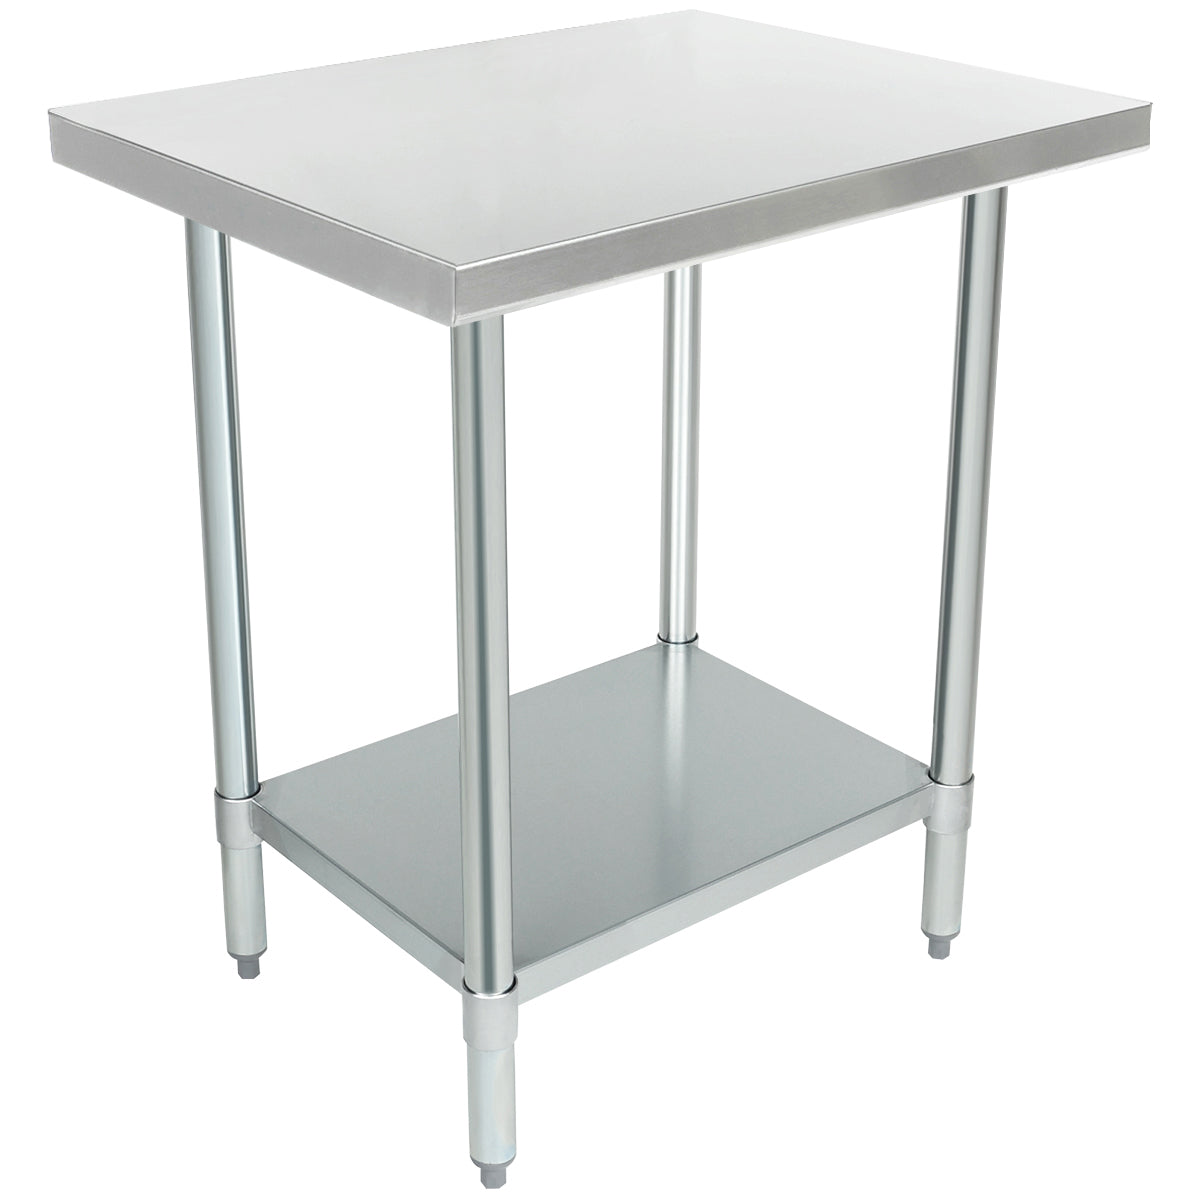 Empura 30" x 24" 18-Gauge 430 Stainless Steel Commercial Work Table with Flat Top Galvanized Legs and Undershelf